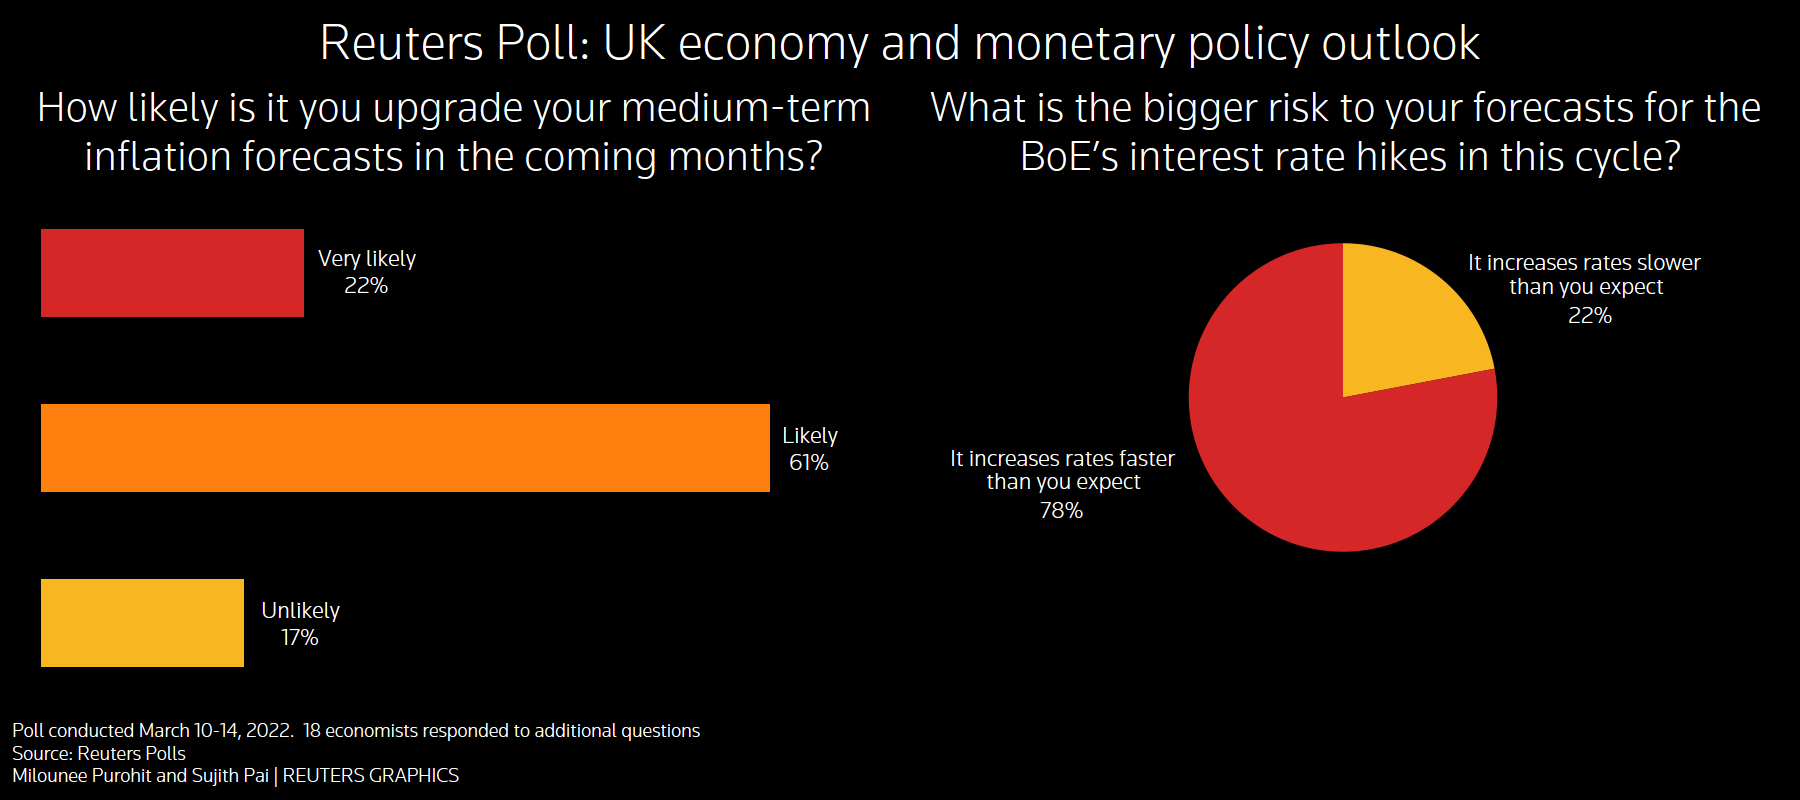 Reuters poll graphic on UK economy and monetary policy outlook